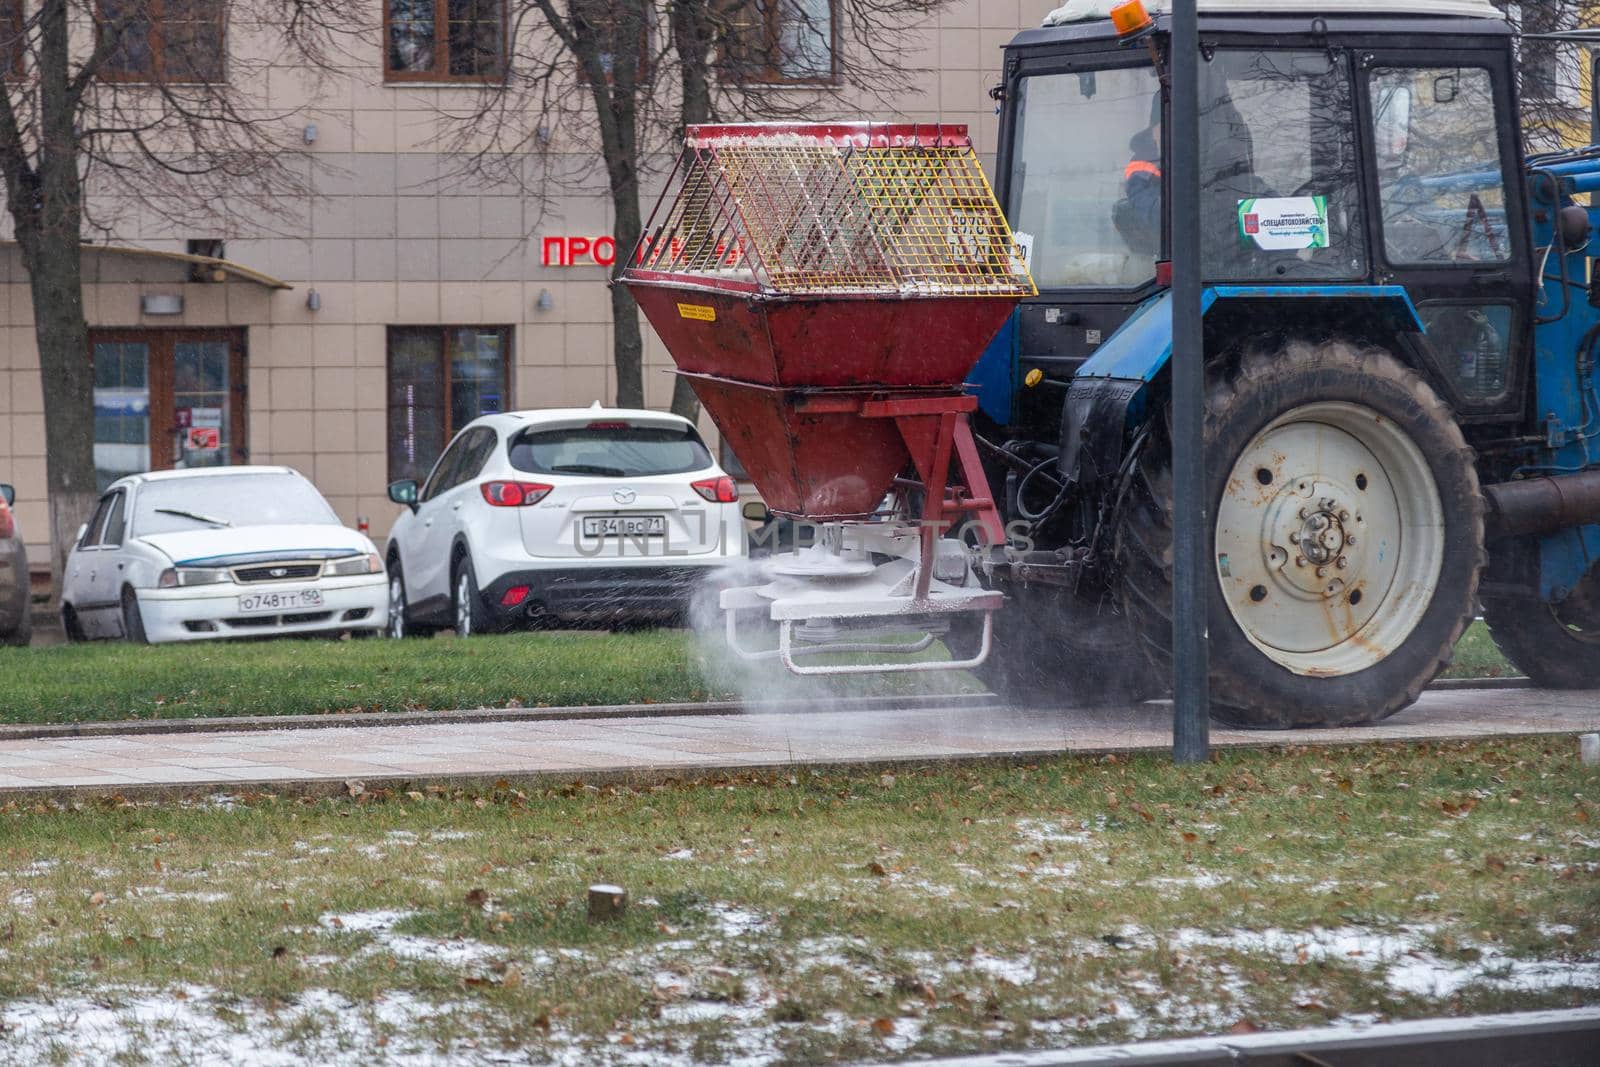 TULA, RUSSIA - NOVEMBER 21, 2020: Tractor spreading salt reagent over city pavement at winter daylight.